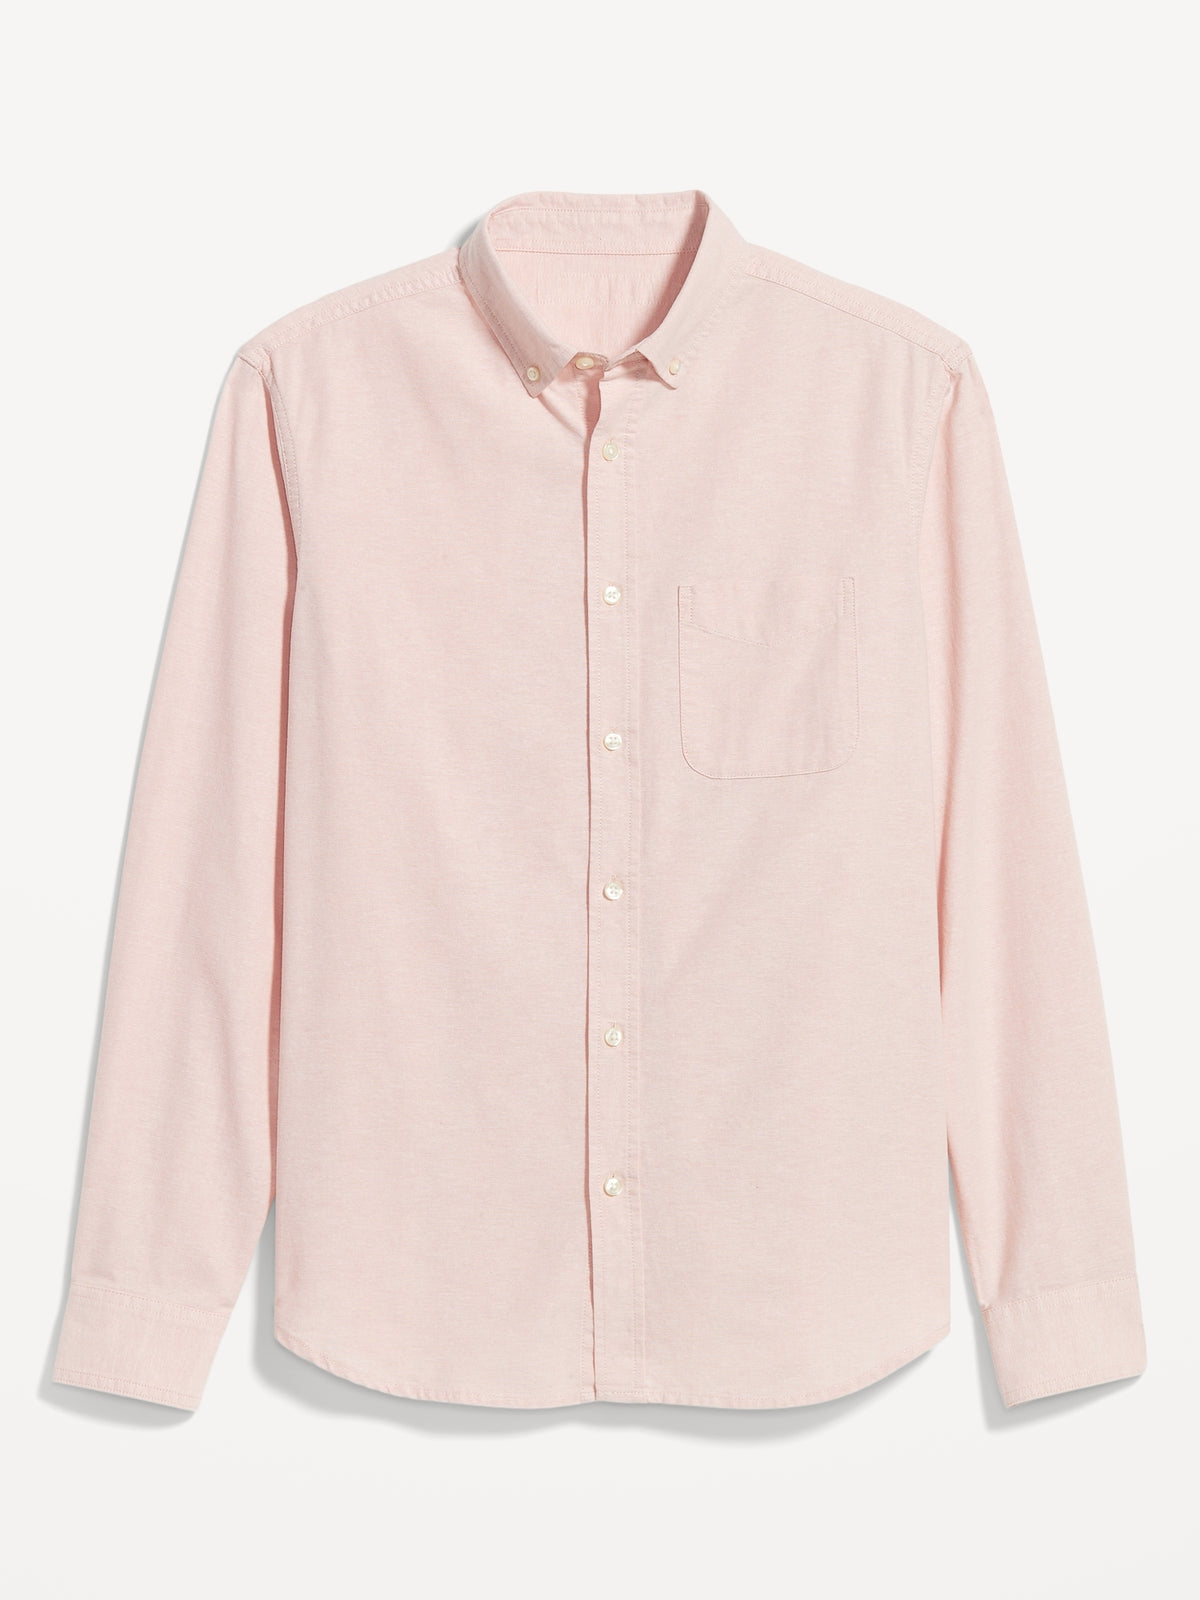 Classic Fit Everyday Oxford Shirt for Men